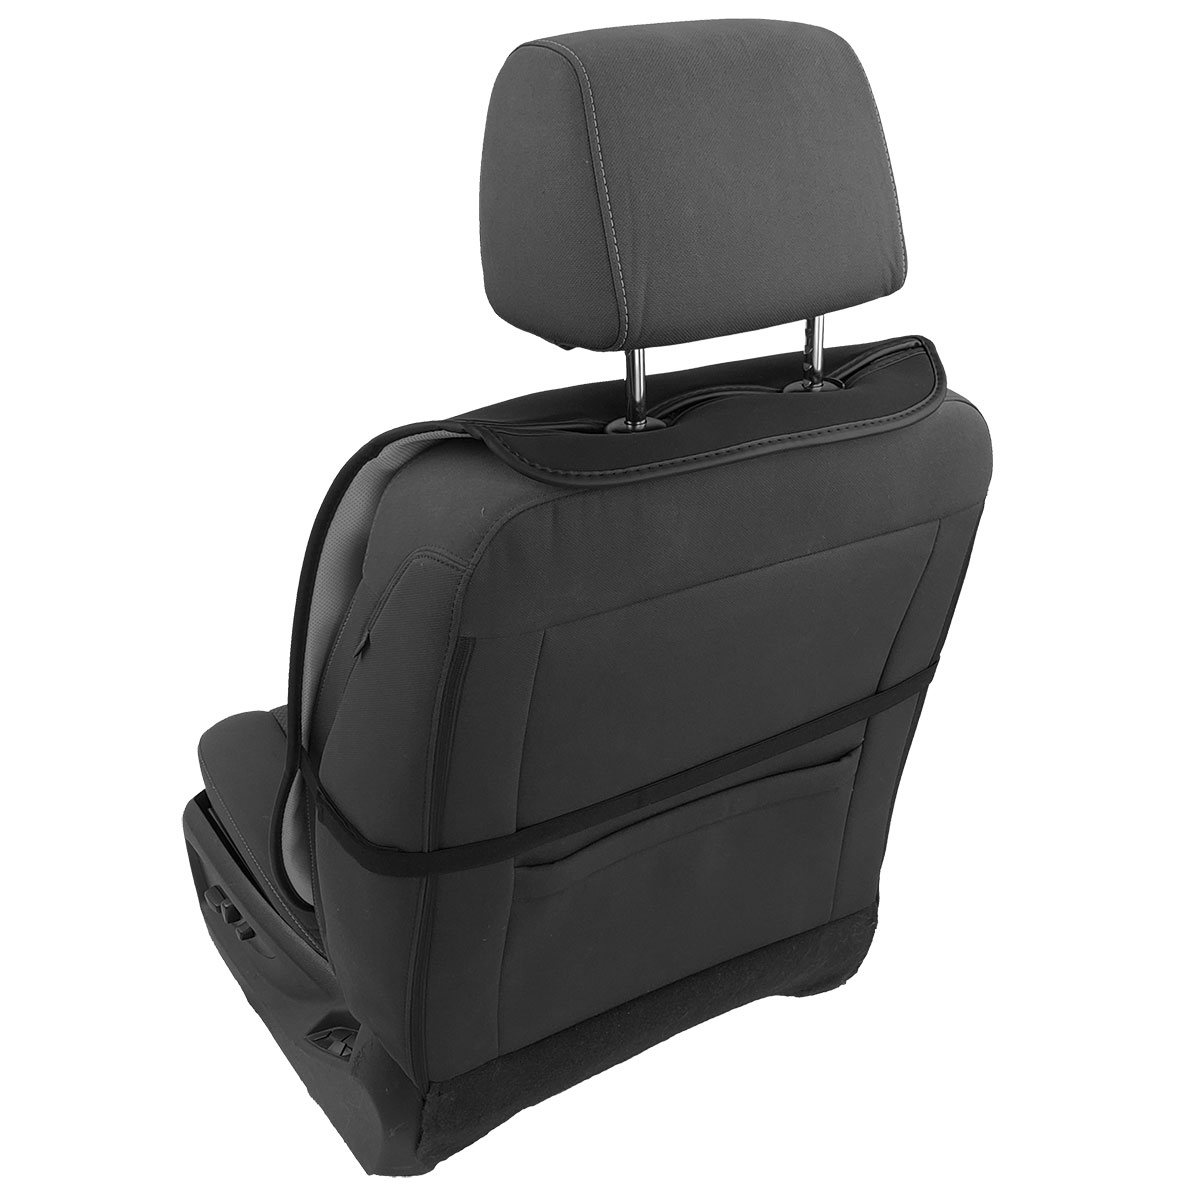 EasyFit Leatherette Seat Covers - Premium Quality - Fits All Vehicles